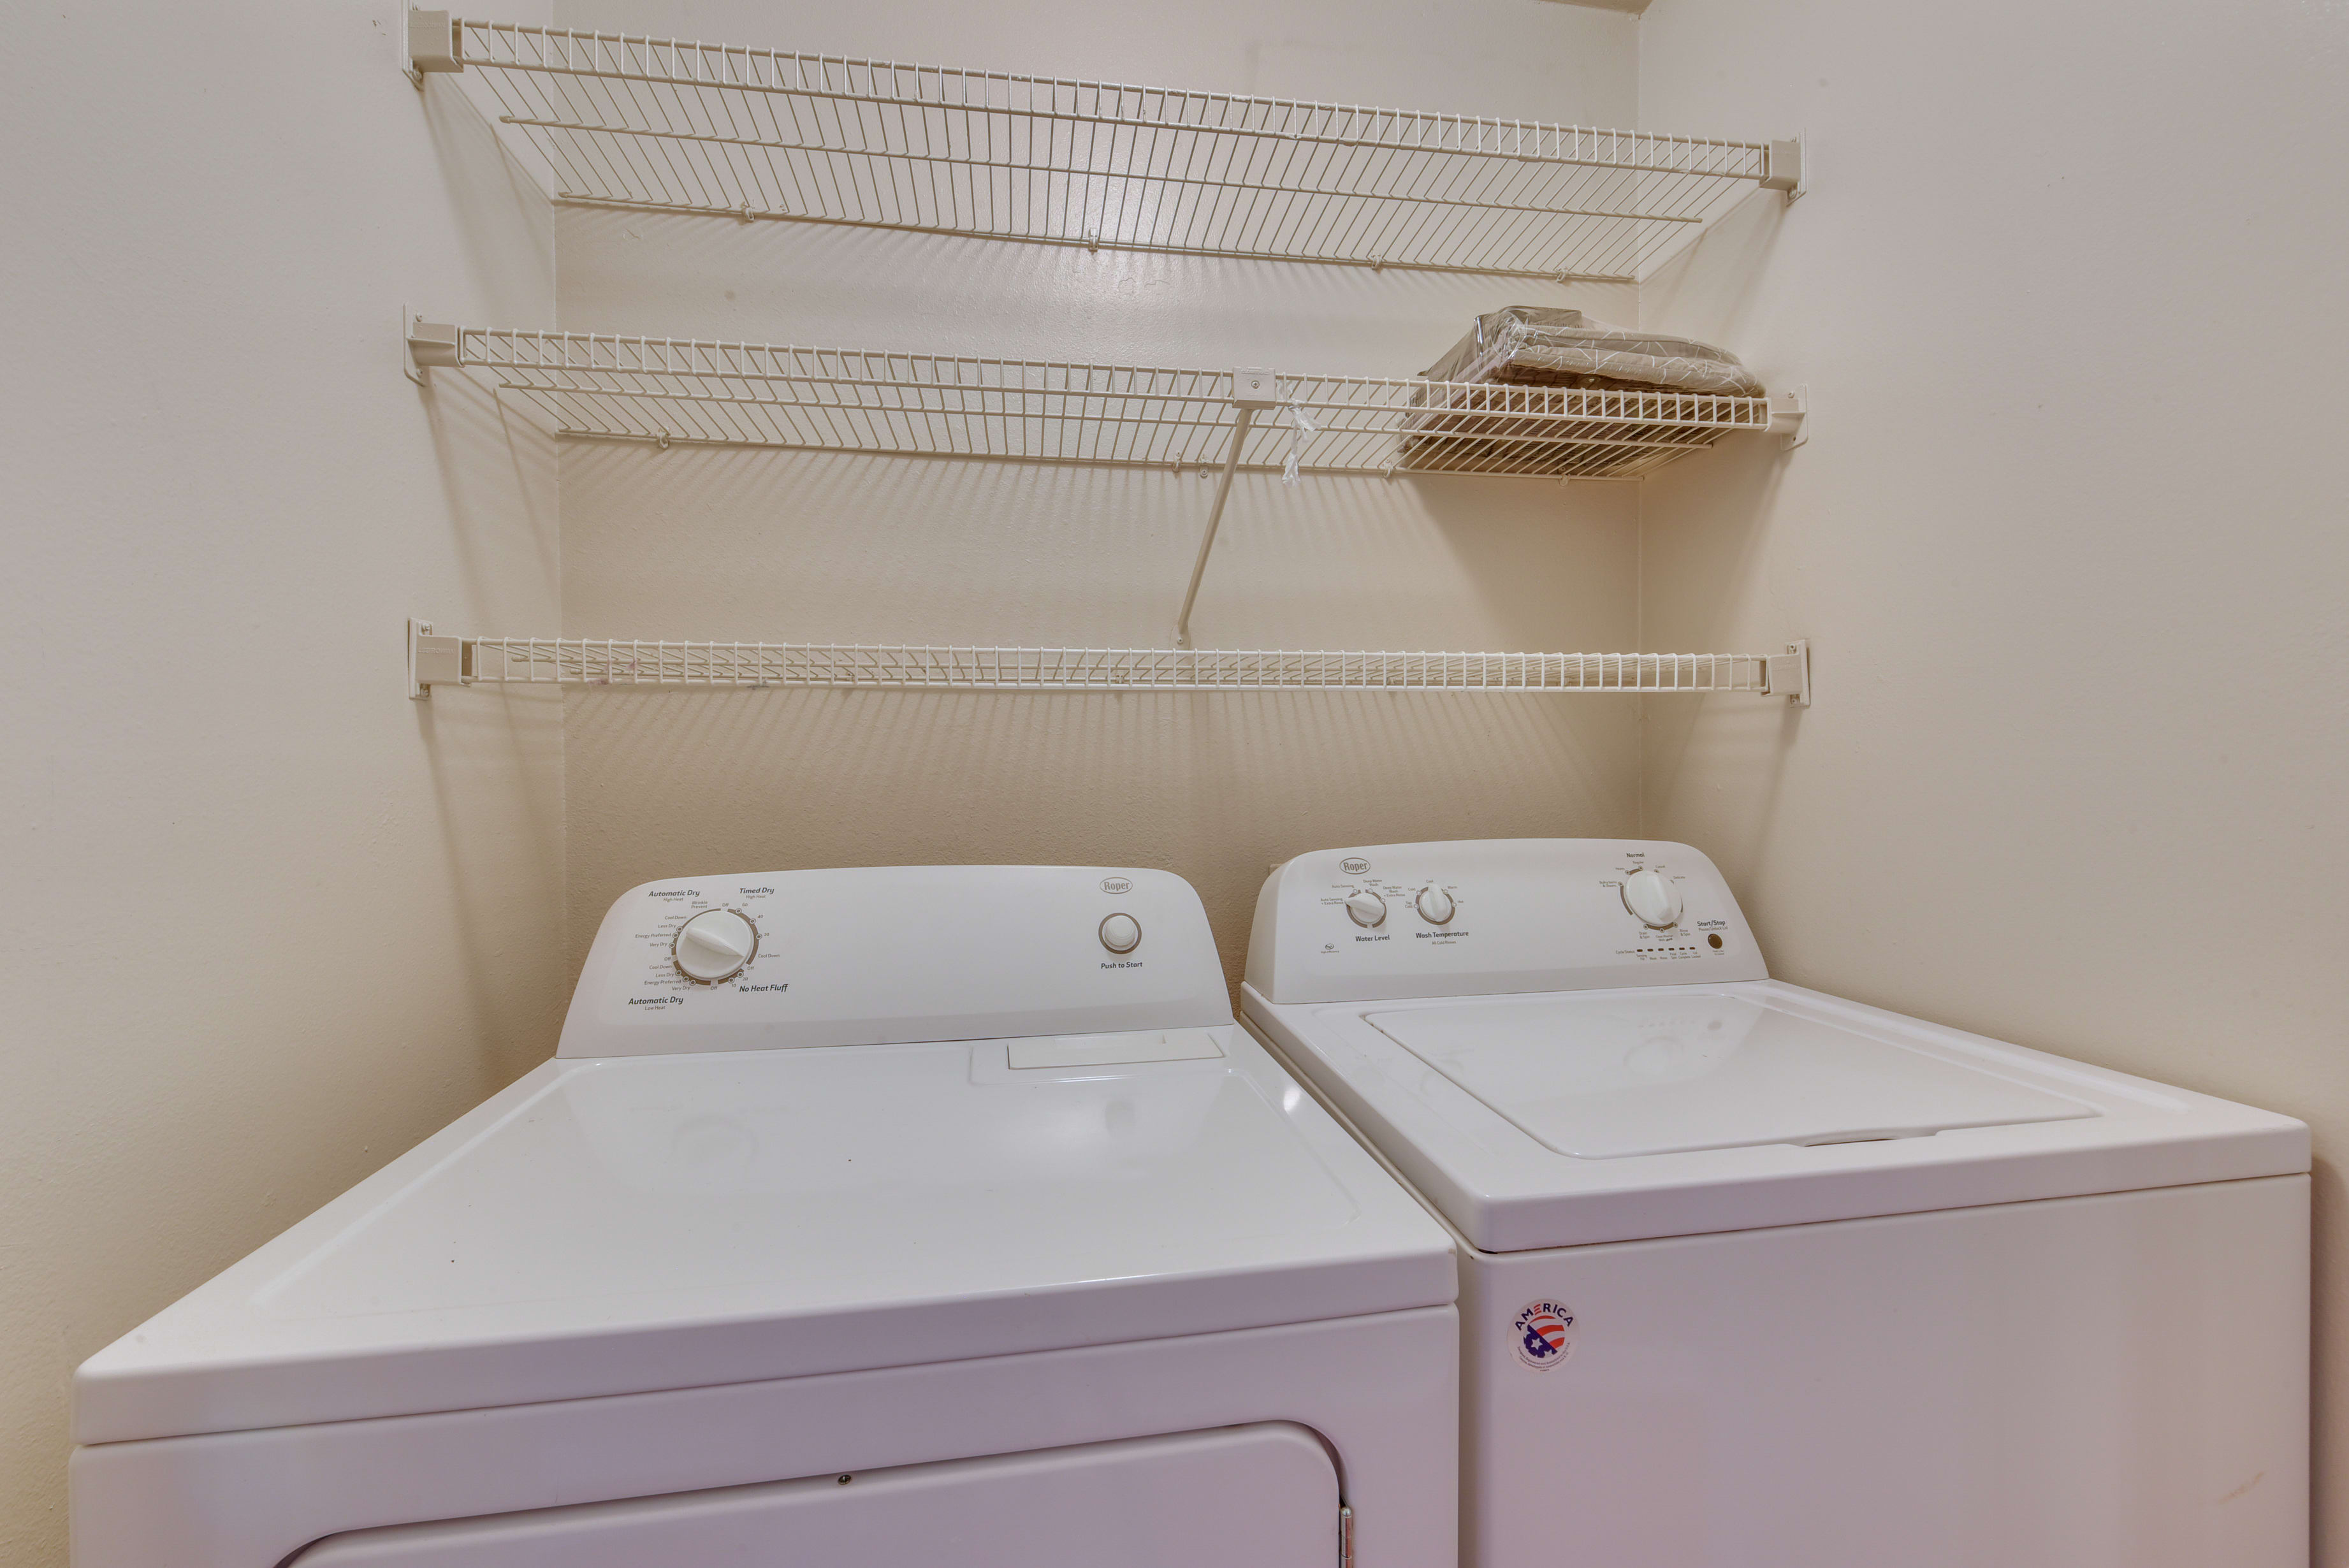 Laundry Area | Washer/Dryer | Iron/Board | Trash Bags/Paper Towels